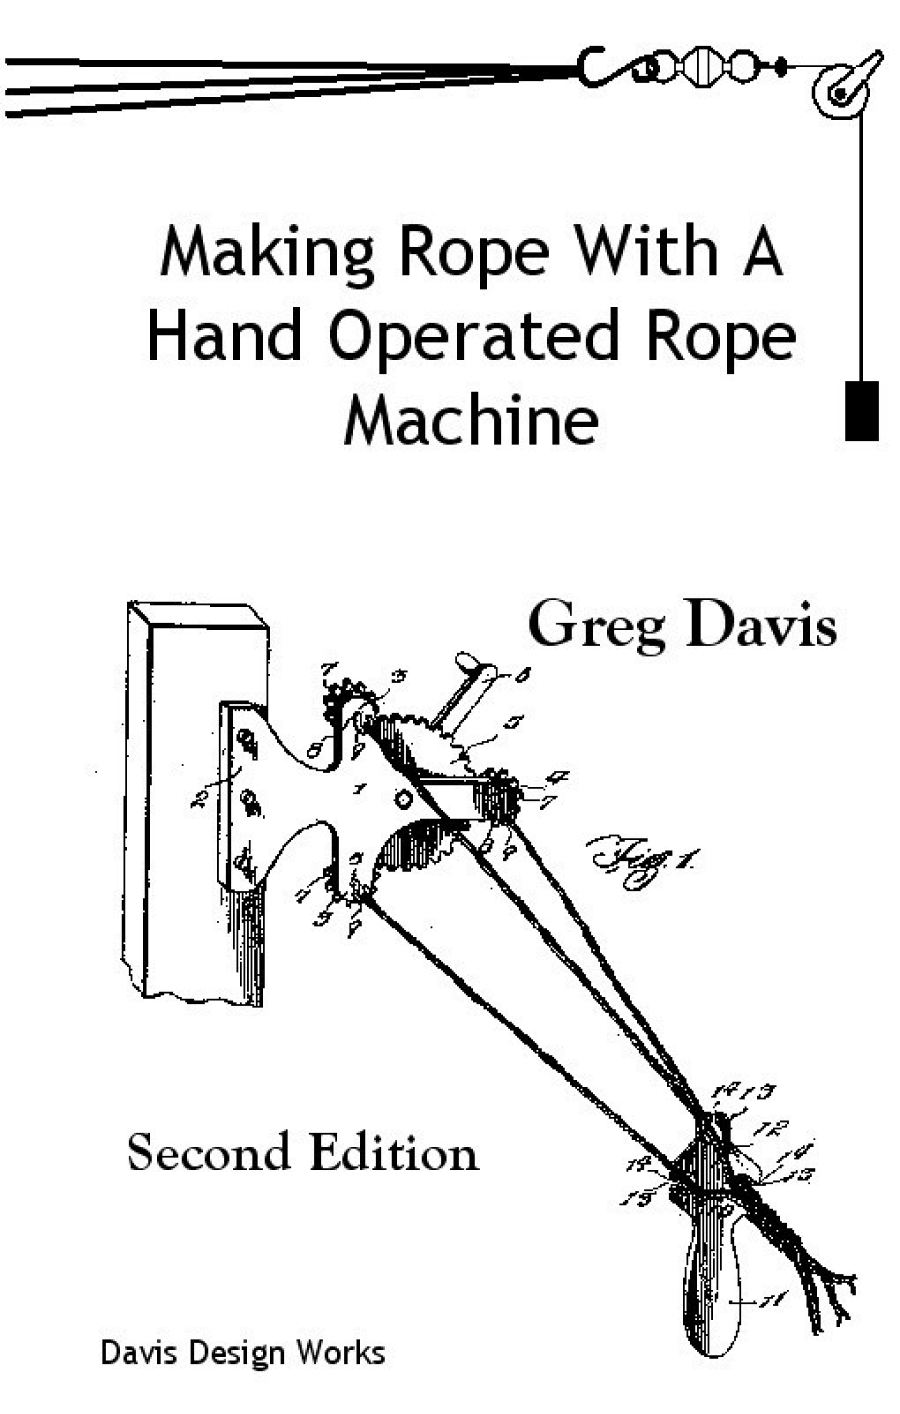 Making Rope With a Hand Operated Rope Machine